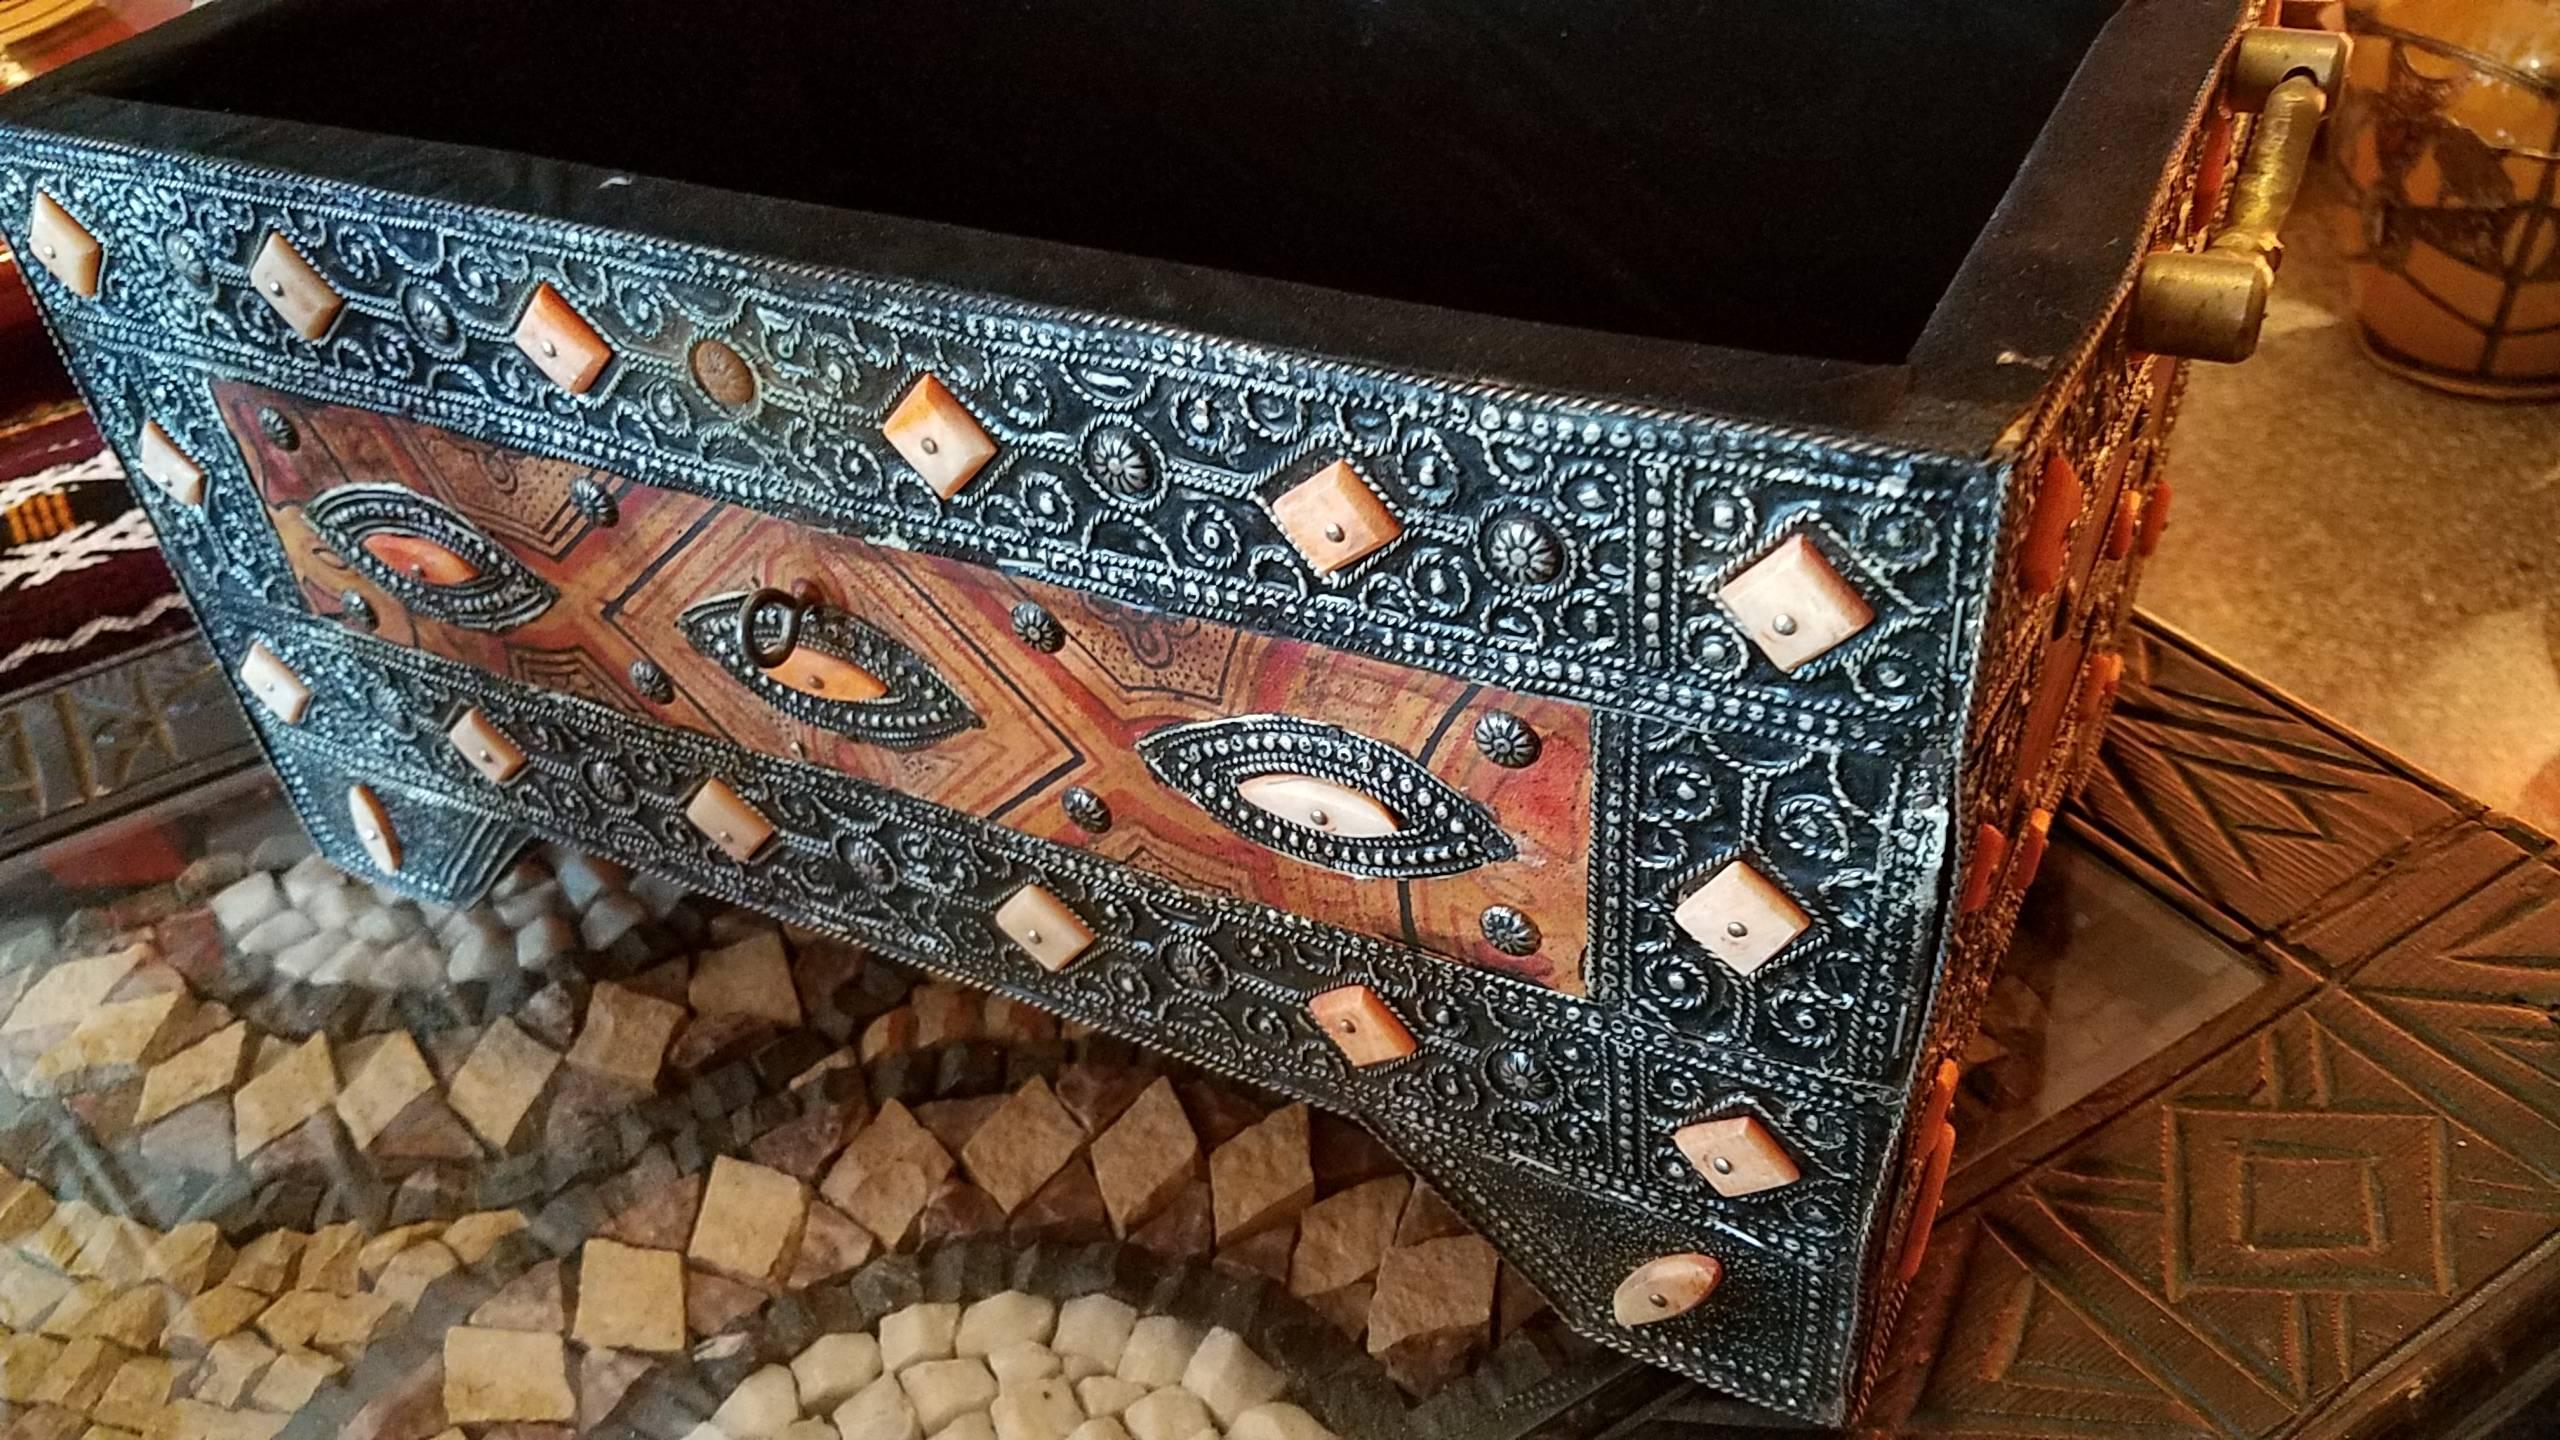 Contemporary Camel Bone / Metal Inlaid Moroccan Wooden Trunk For Sale